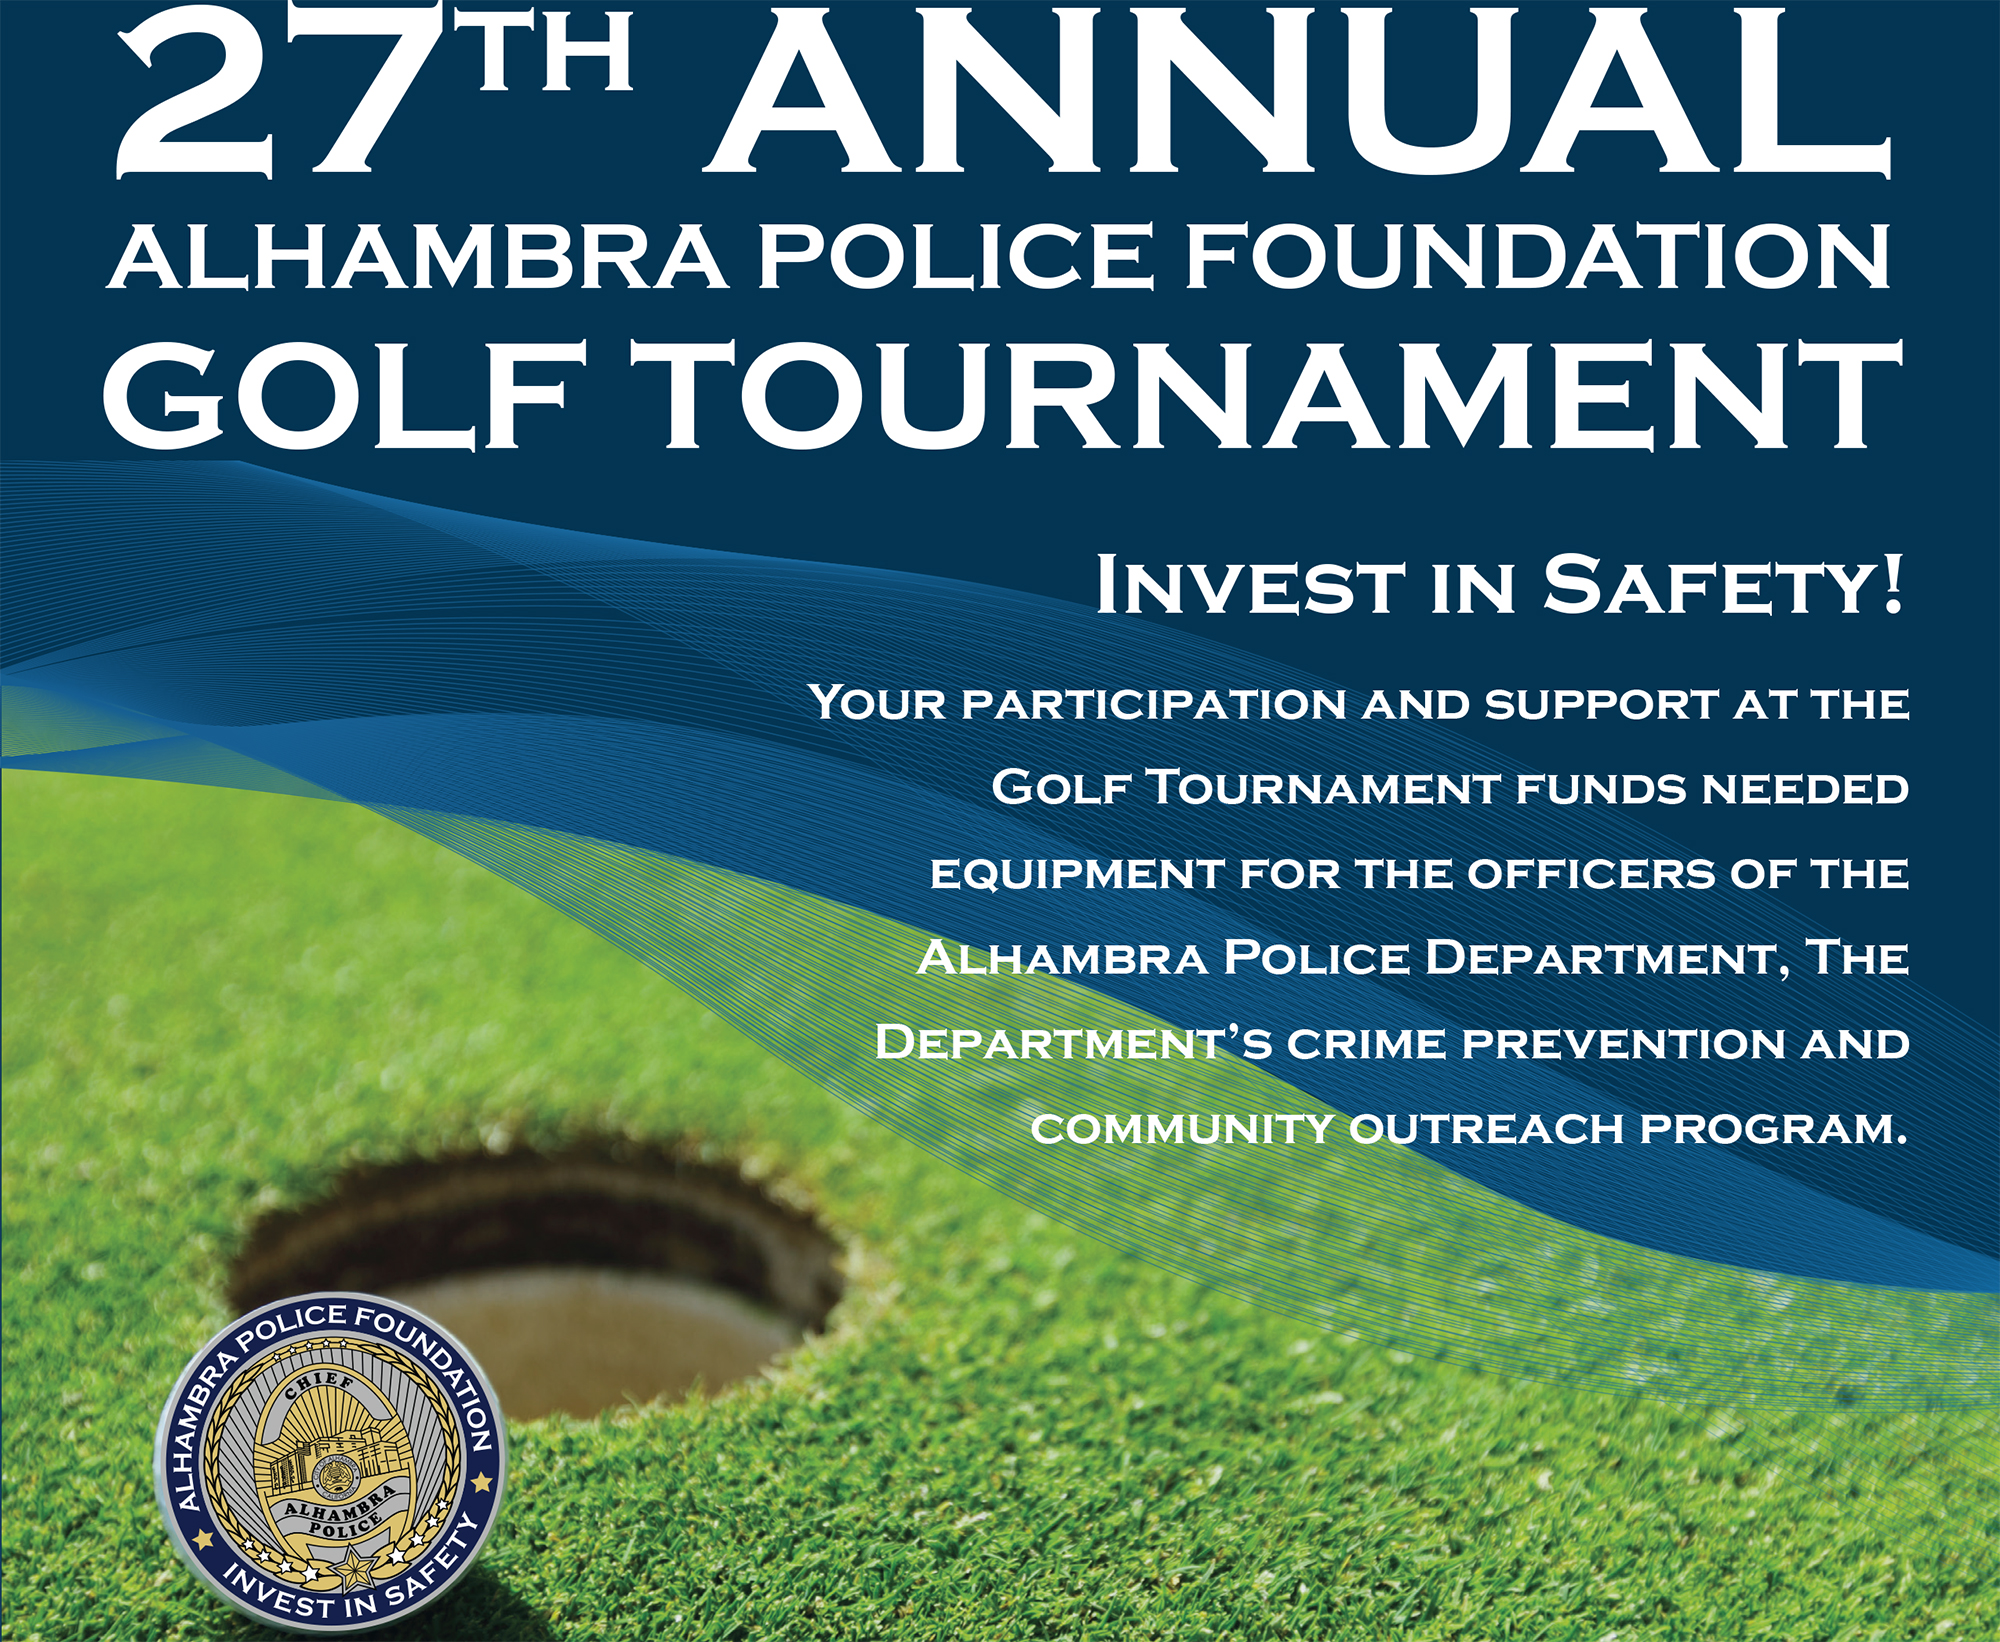 27th Annual Alhambra Police Foundation Golf Tournament